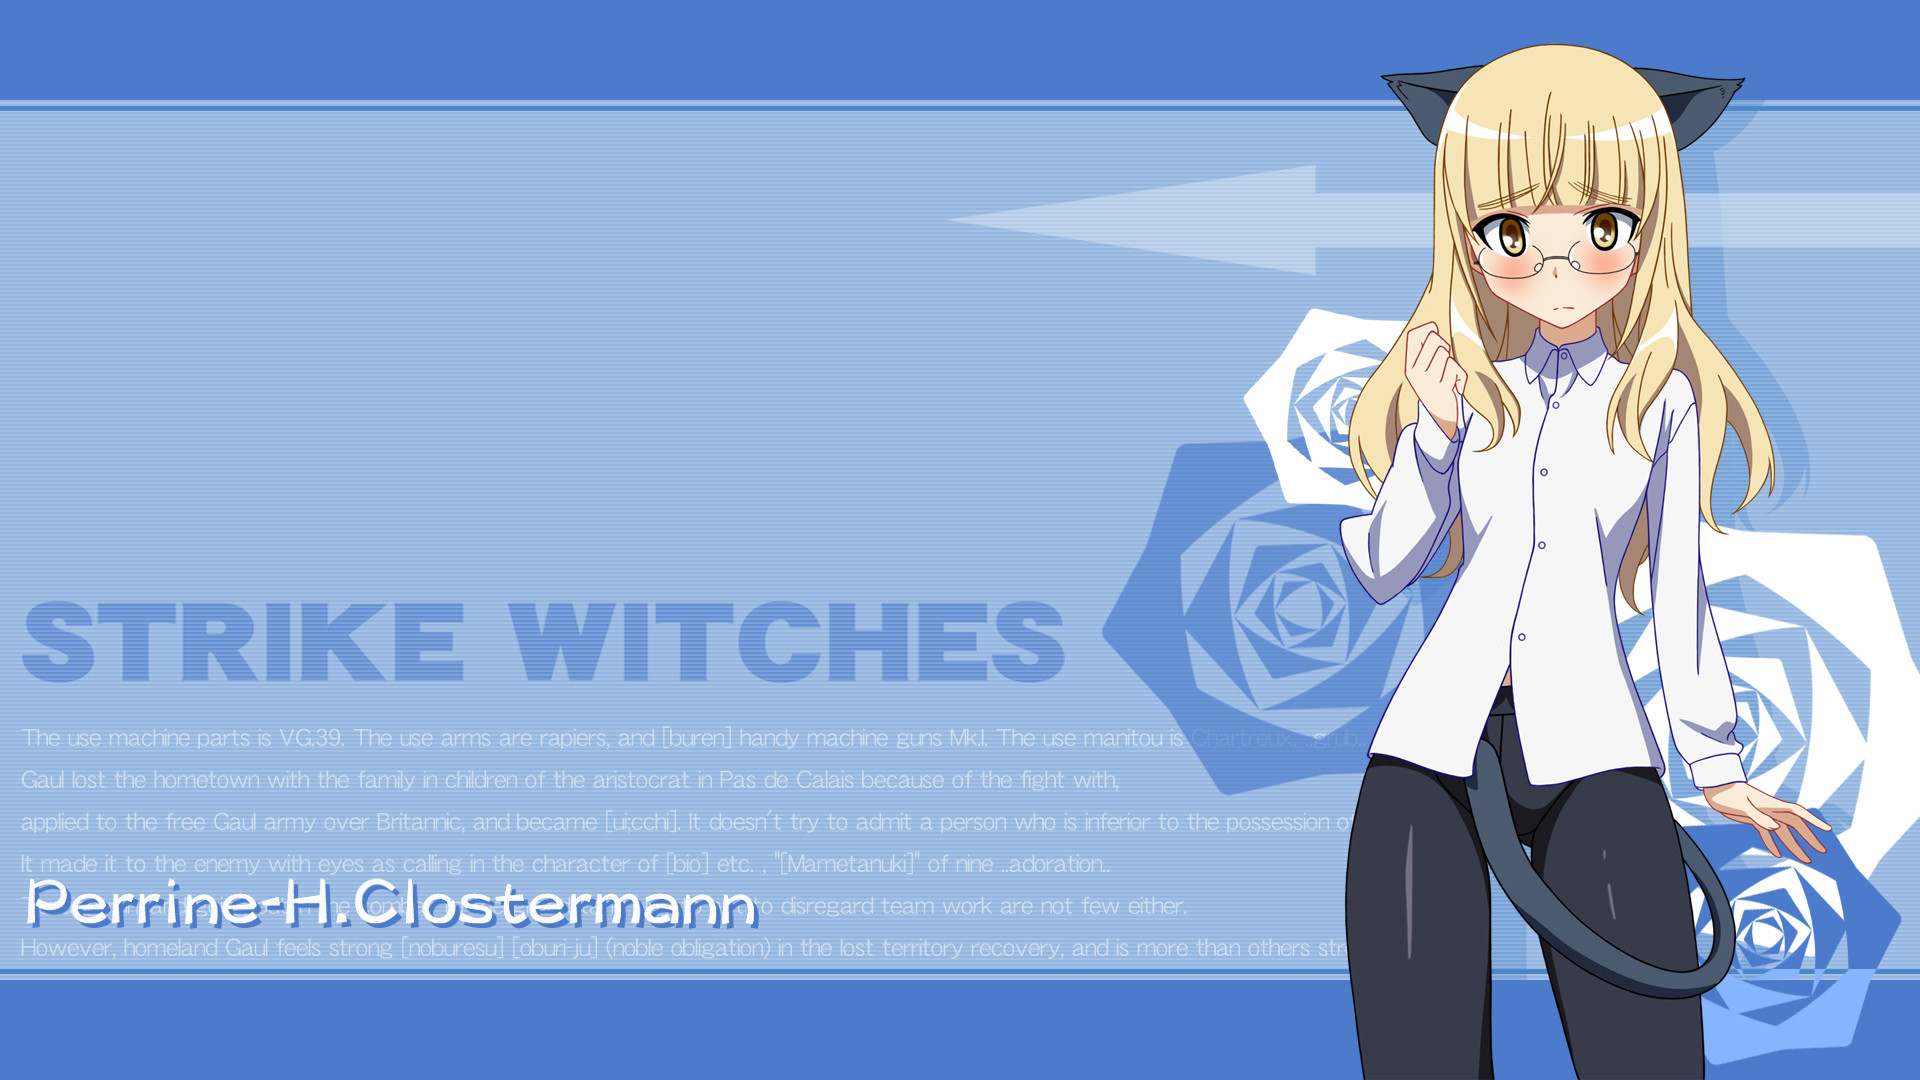 1920x1080 Perrine H. Clostermann, my least liked character in the 501st Joint Fighter  Wing,